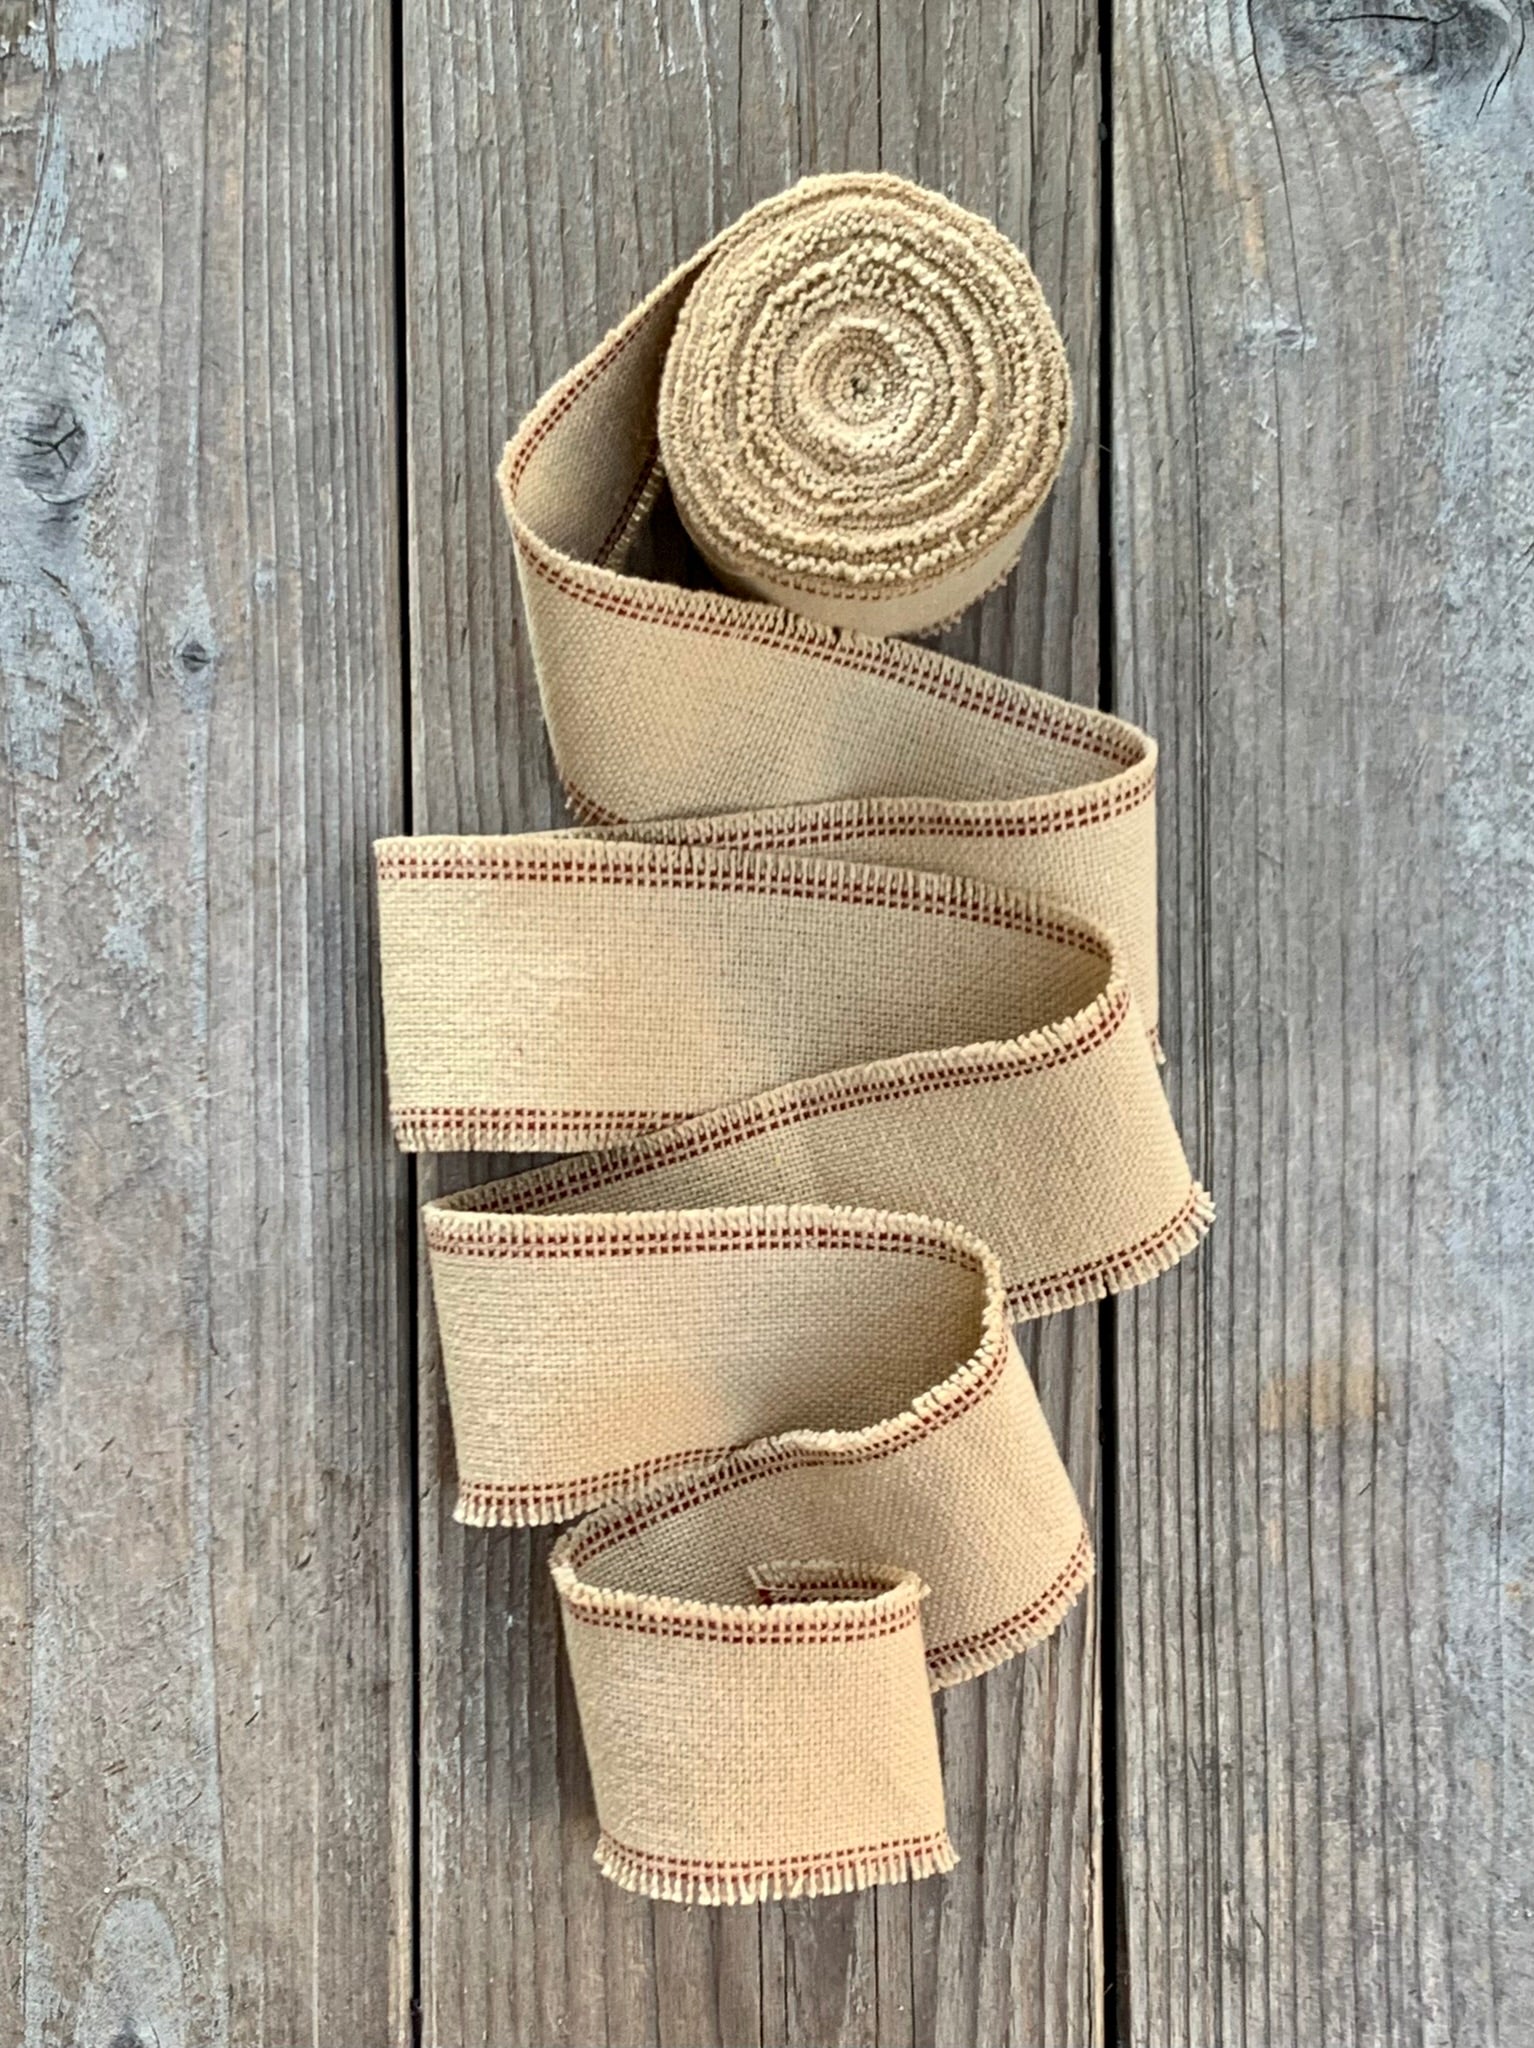 Grain Sack Ribbon - Red and Beige Frayed Edge - 2 1/4" Wide